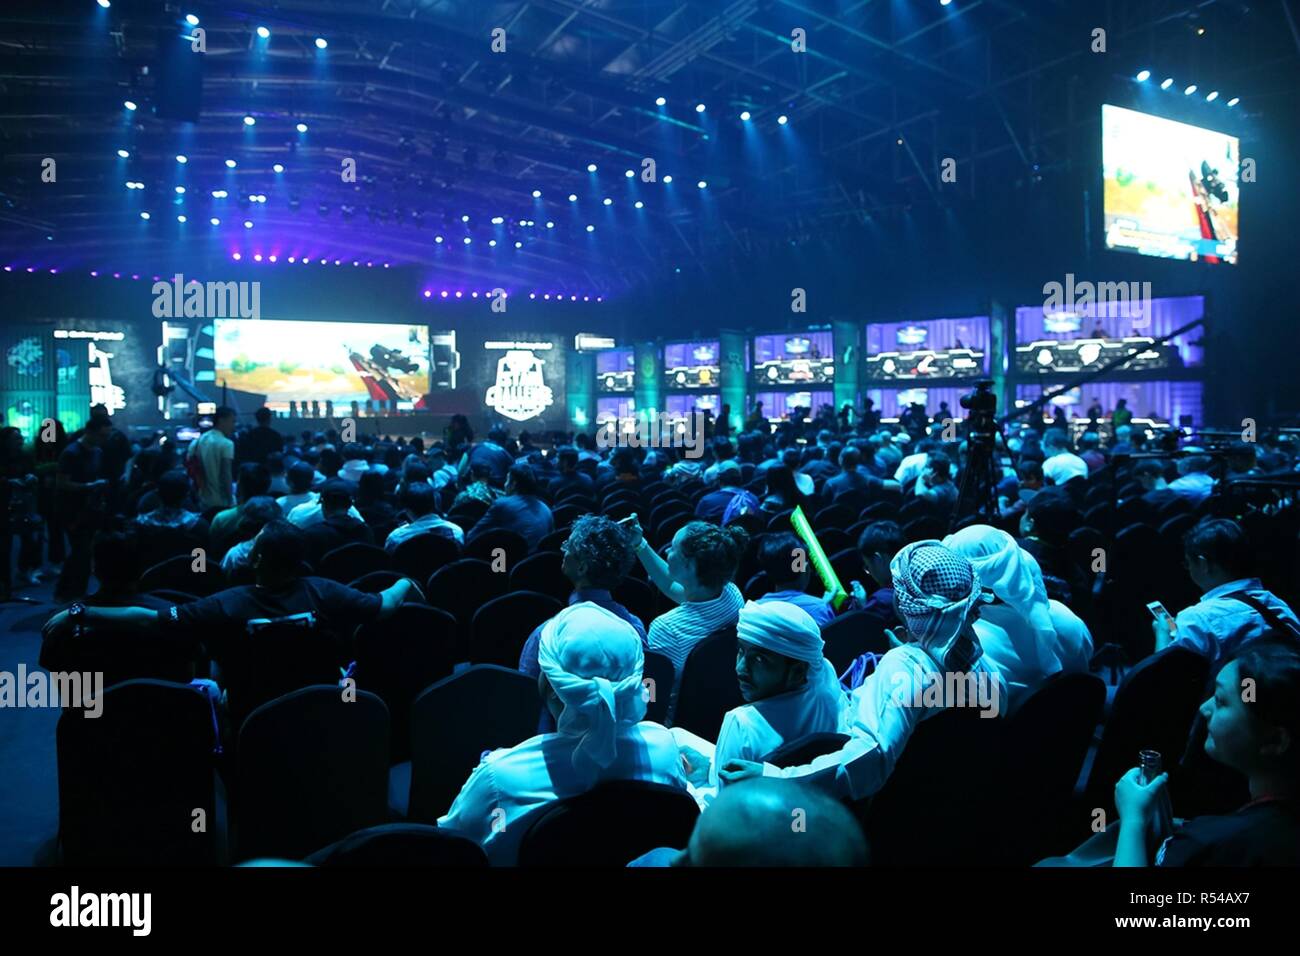 Dubai, United Arab Emirates. 29th Nov, 2018. Players compete during the PlayerUnknown's Battlegrounds (PUBG) Mobile Star Challenge Global Finals in Dubai, the United Arab Emirates, Nov. 29, 2018. The PUBG final is held in Dubai from Nov. 29 to Dec. 1. Credit: Mahmoud Khaled/Xinhua/Alamy Live News Stock Photo